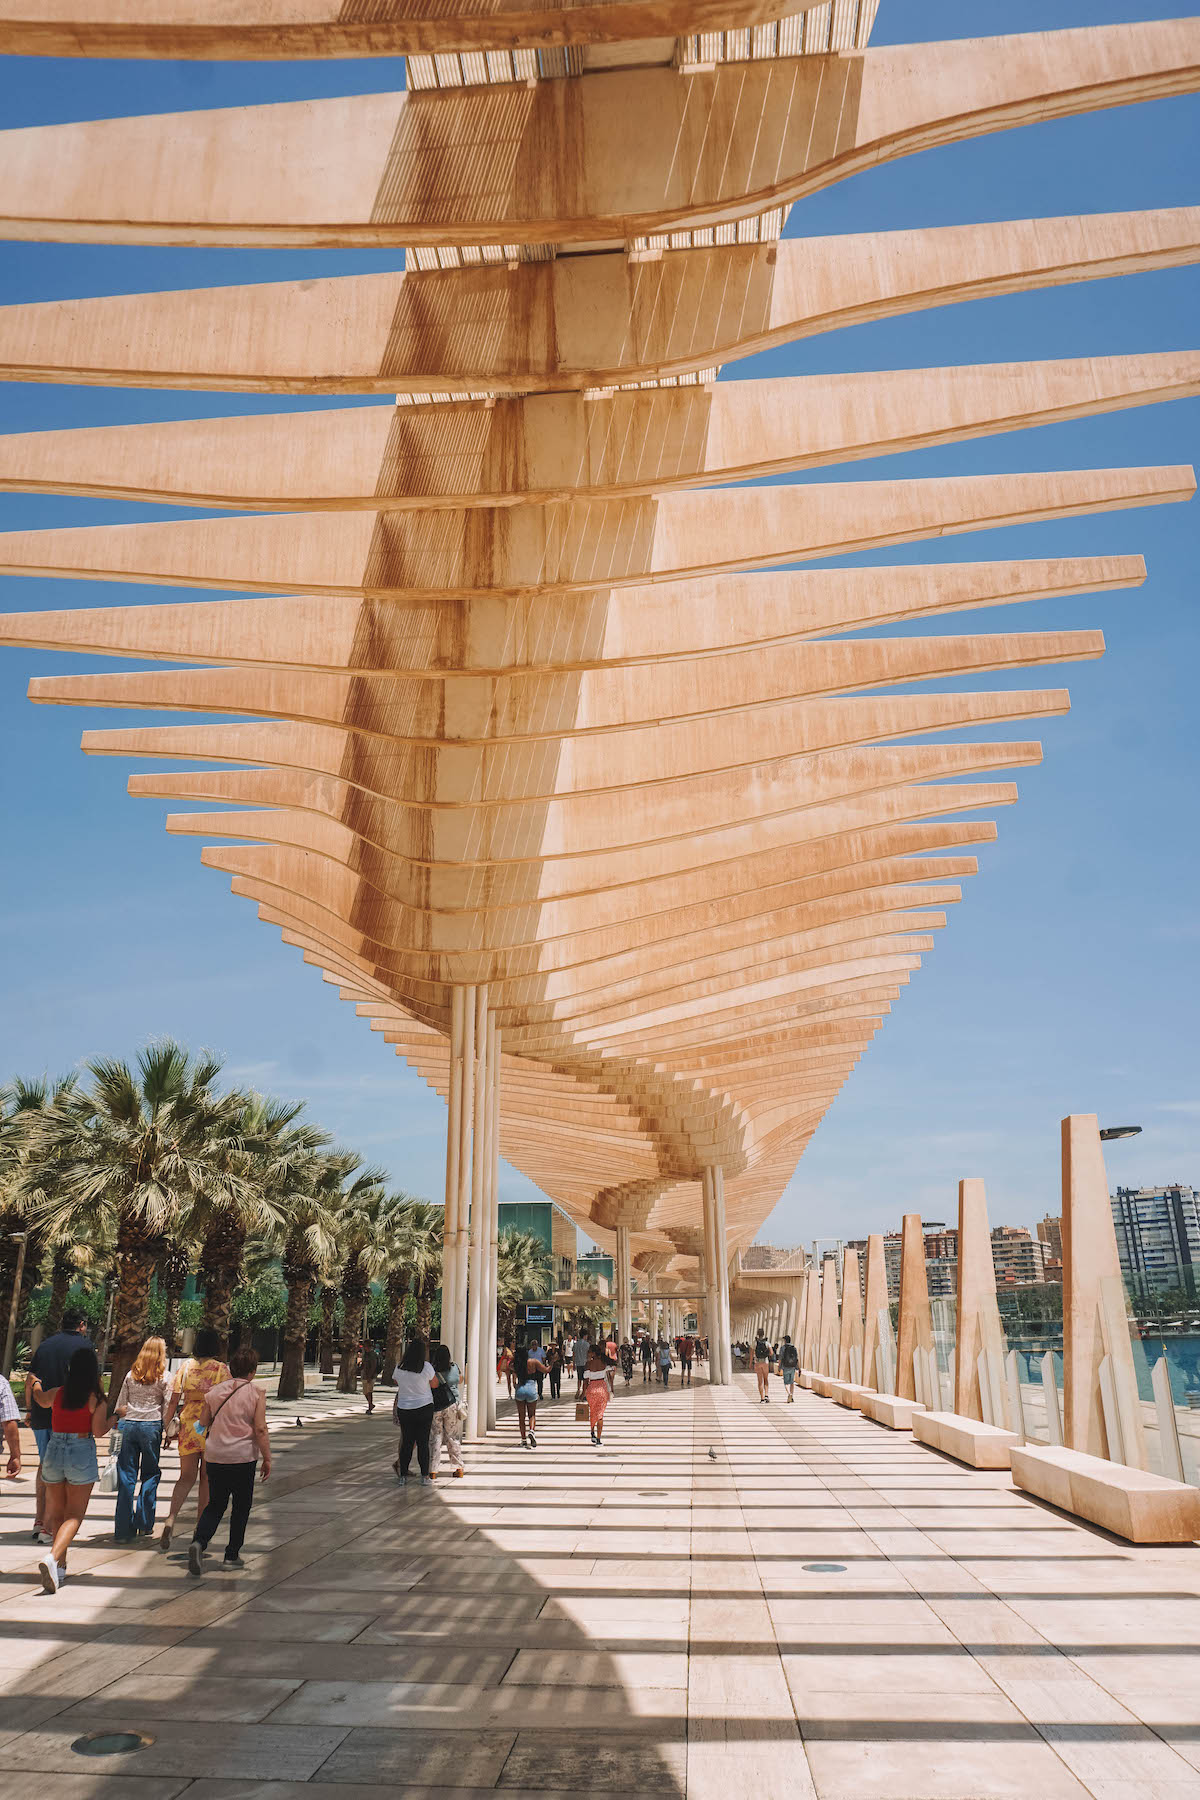 The paseo of Muelle Uno in Malaga, Spain.